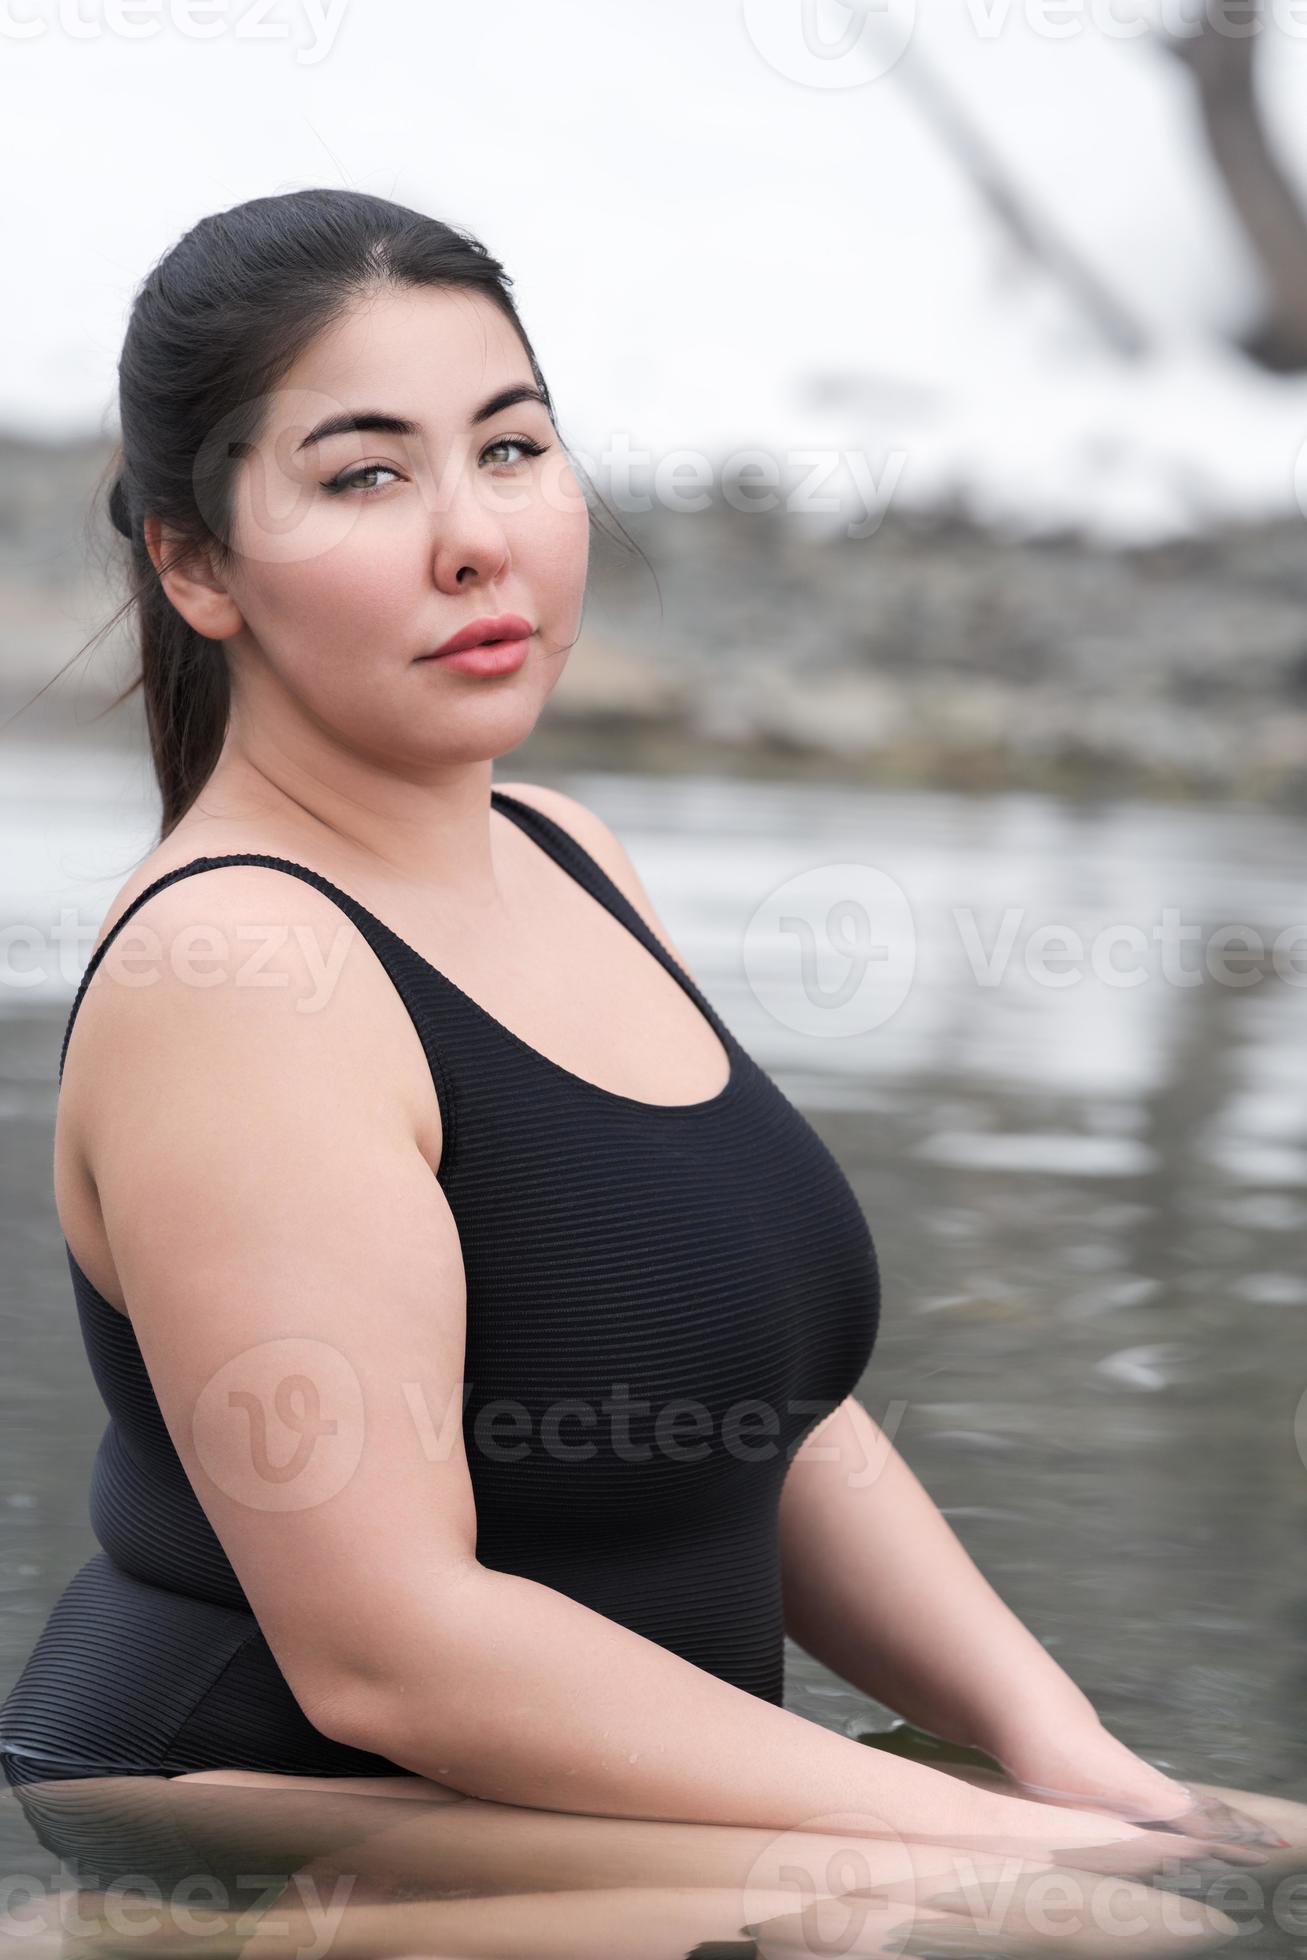 https://static.vecteezy.com/system/resources/previews/021/791/929/large_2x/young-busty-curvy-full-figured-young-model-in-black-swimsuit-sitting-in-outdoors-pool-at-spa-resort-photo.jpg